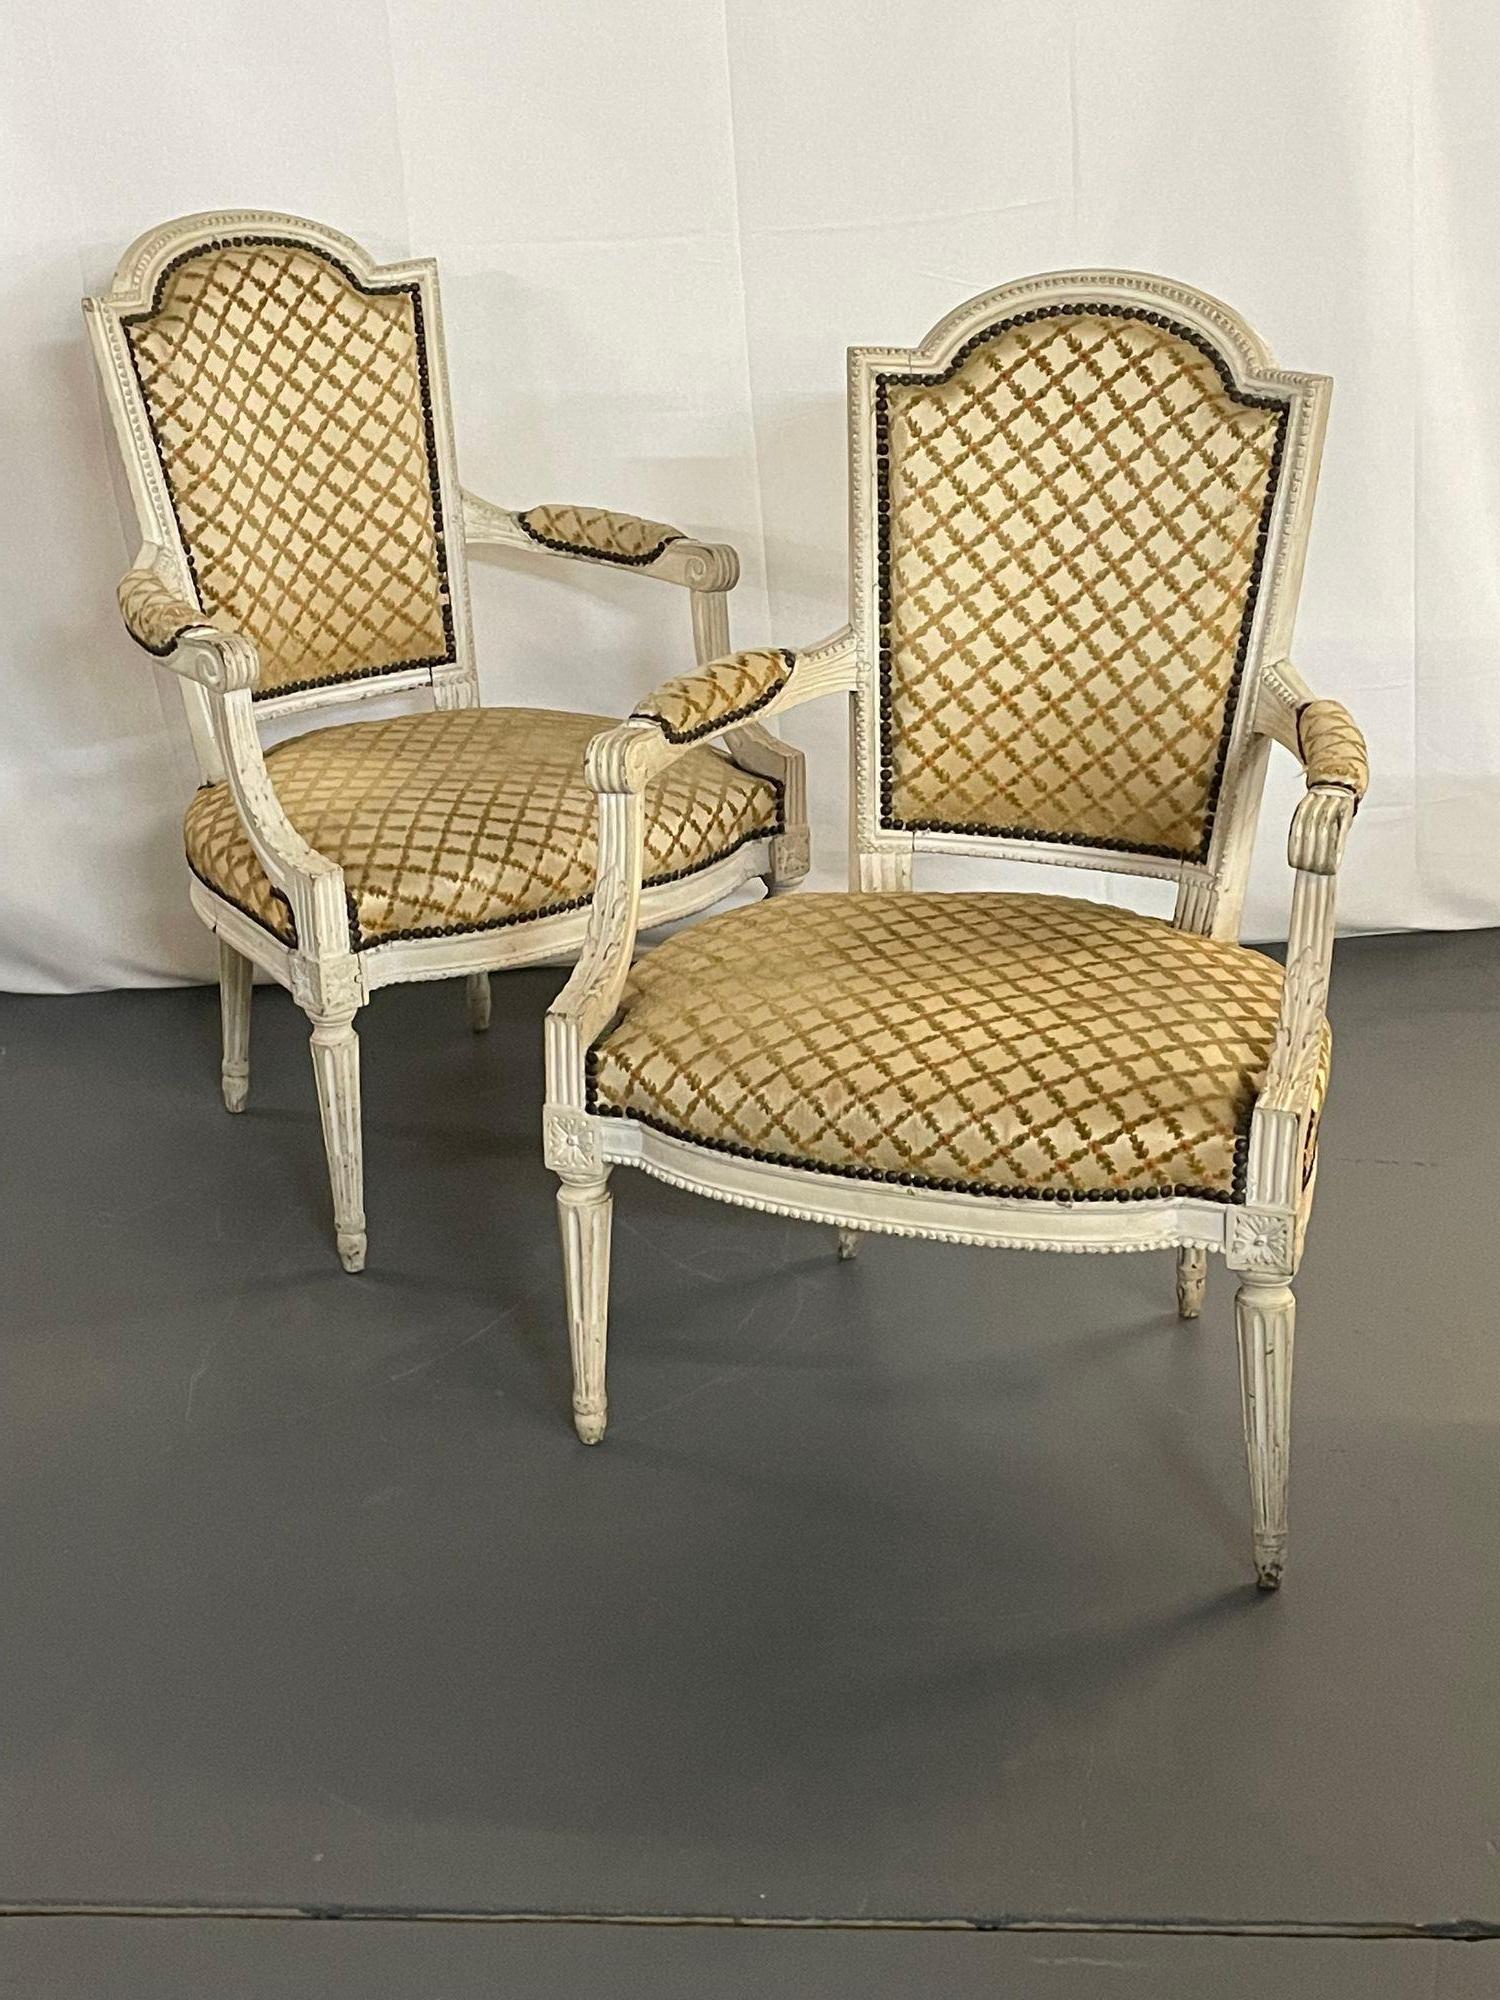 Pair of French Louis XIV Style Armchairs, Fauteuils, Maison Jansen Style, Pegged
A pair of Swedish French Arm Chairs or Fauteuils each having distressed pegged frames. These Maison Jansen inspired chairs are indicative of the finest quality. Circa